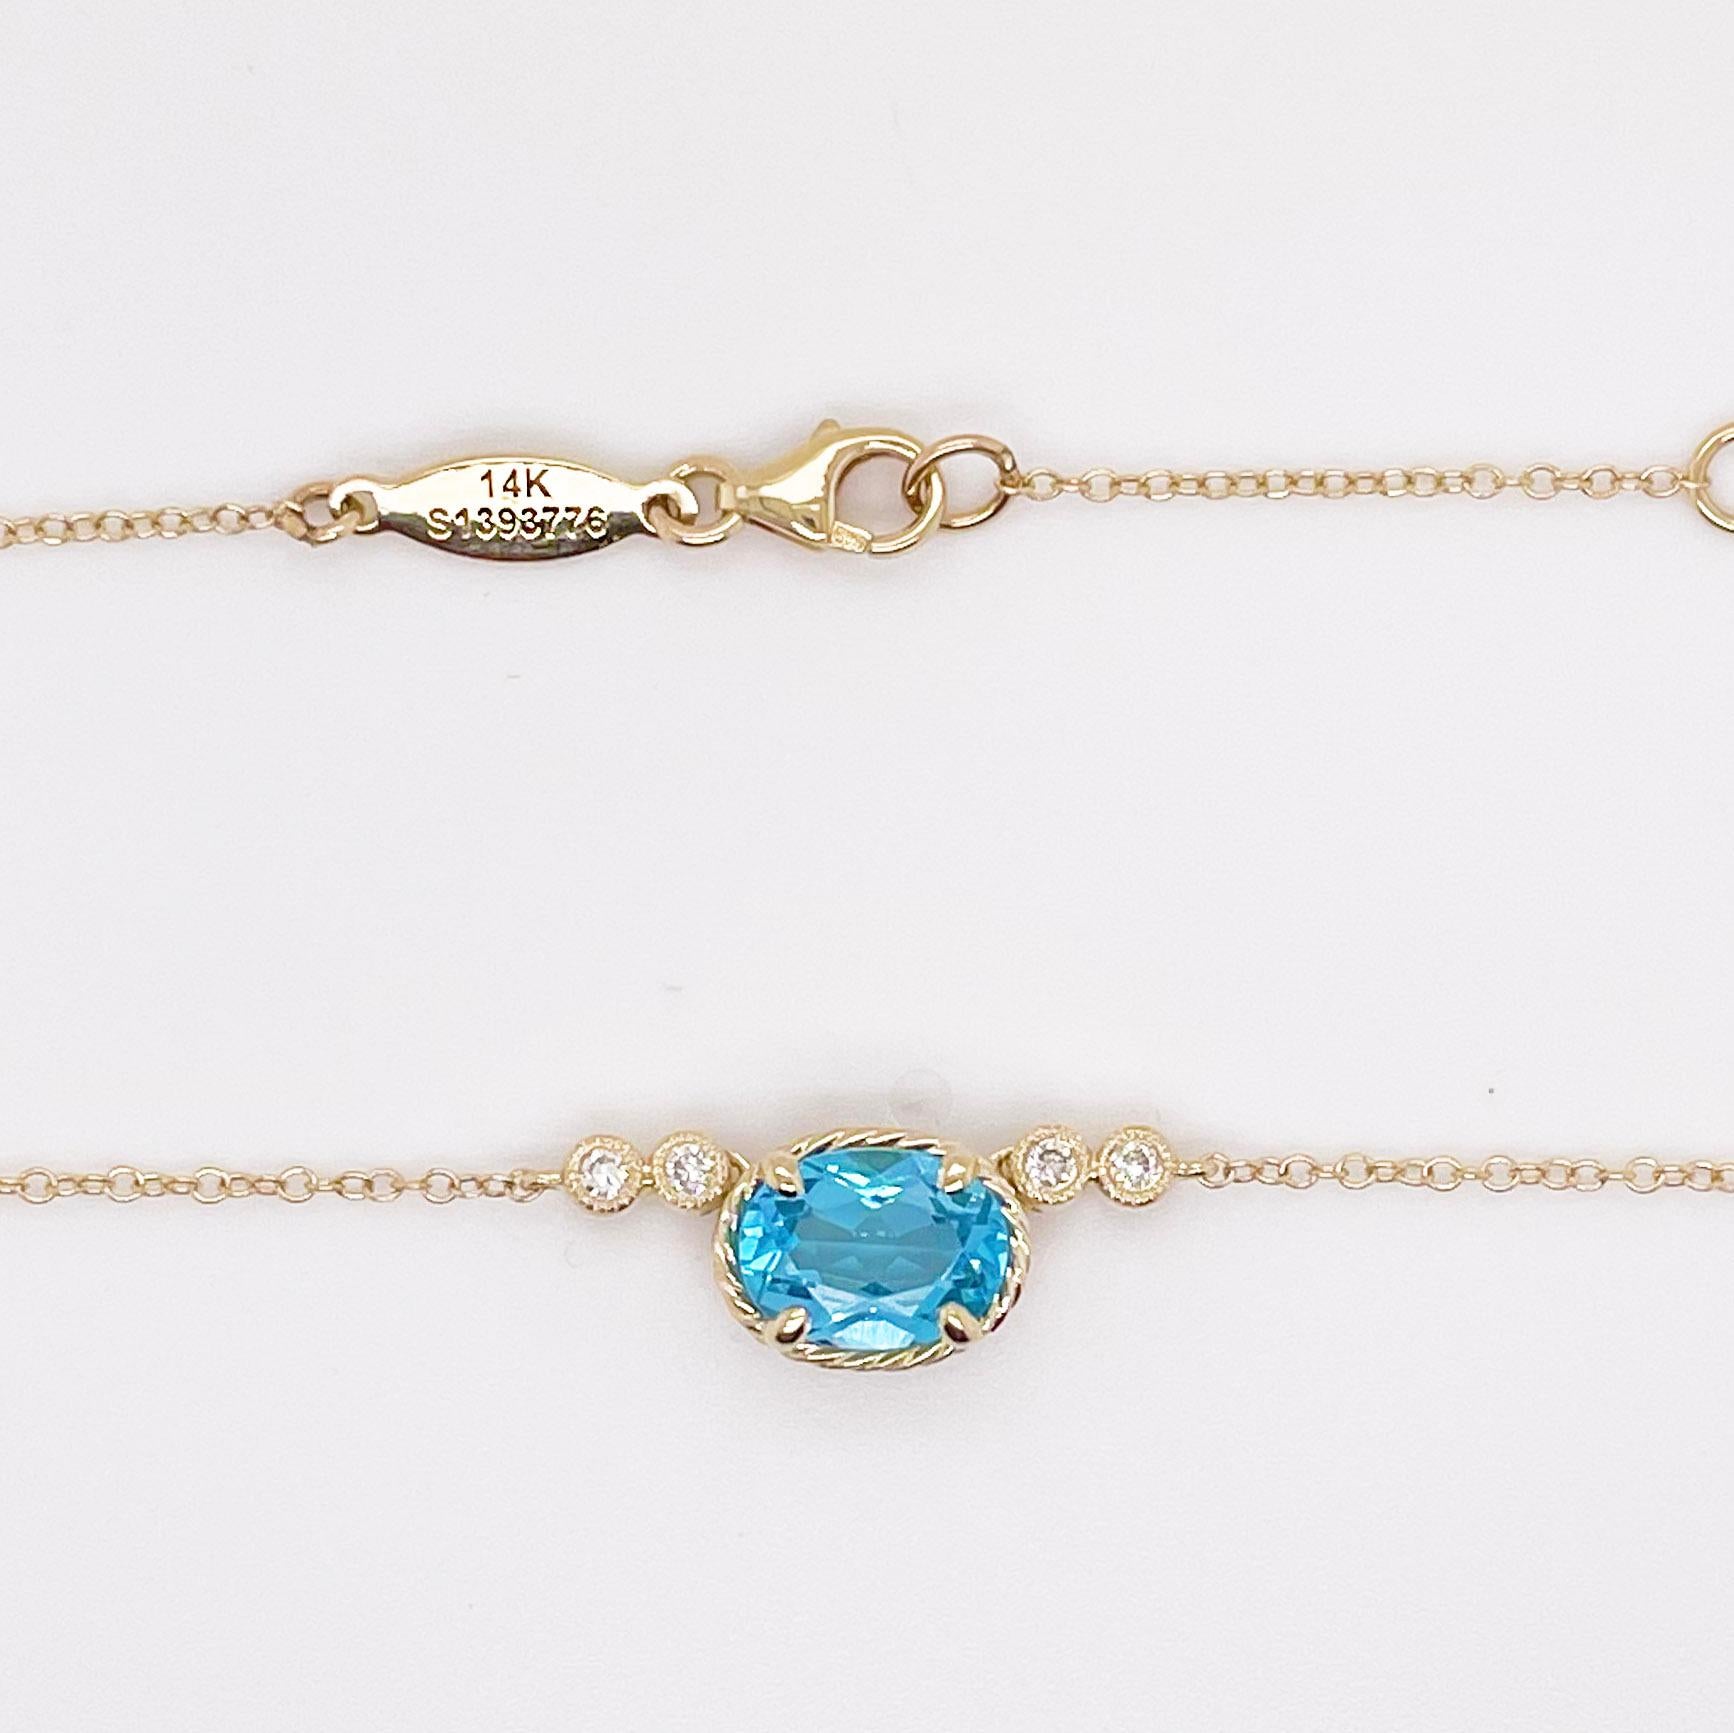 This stunning Swiss blue topaz necklace will lay delicately on any neckline. With this beautiful design you can wear it alone or layer with a paperclip necklace or if you really want to give it some more sparkle a diamond solitaire. 
The details for